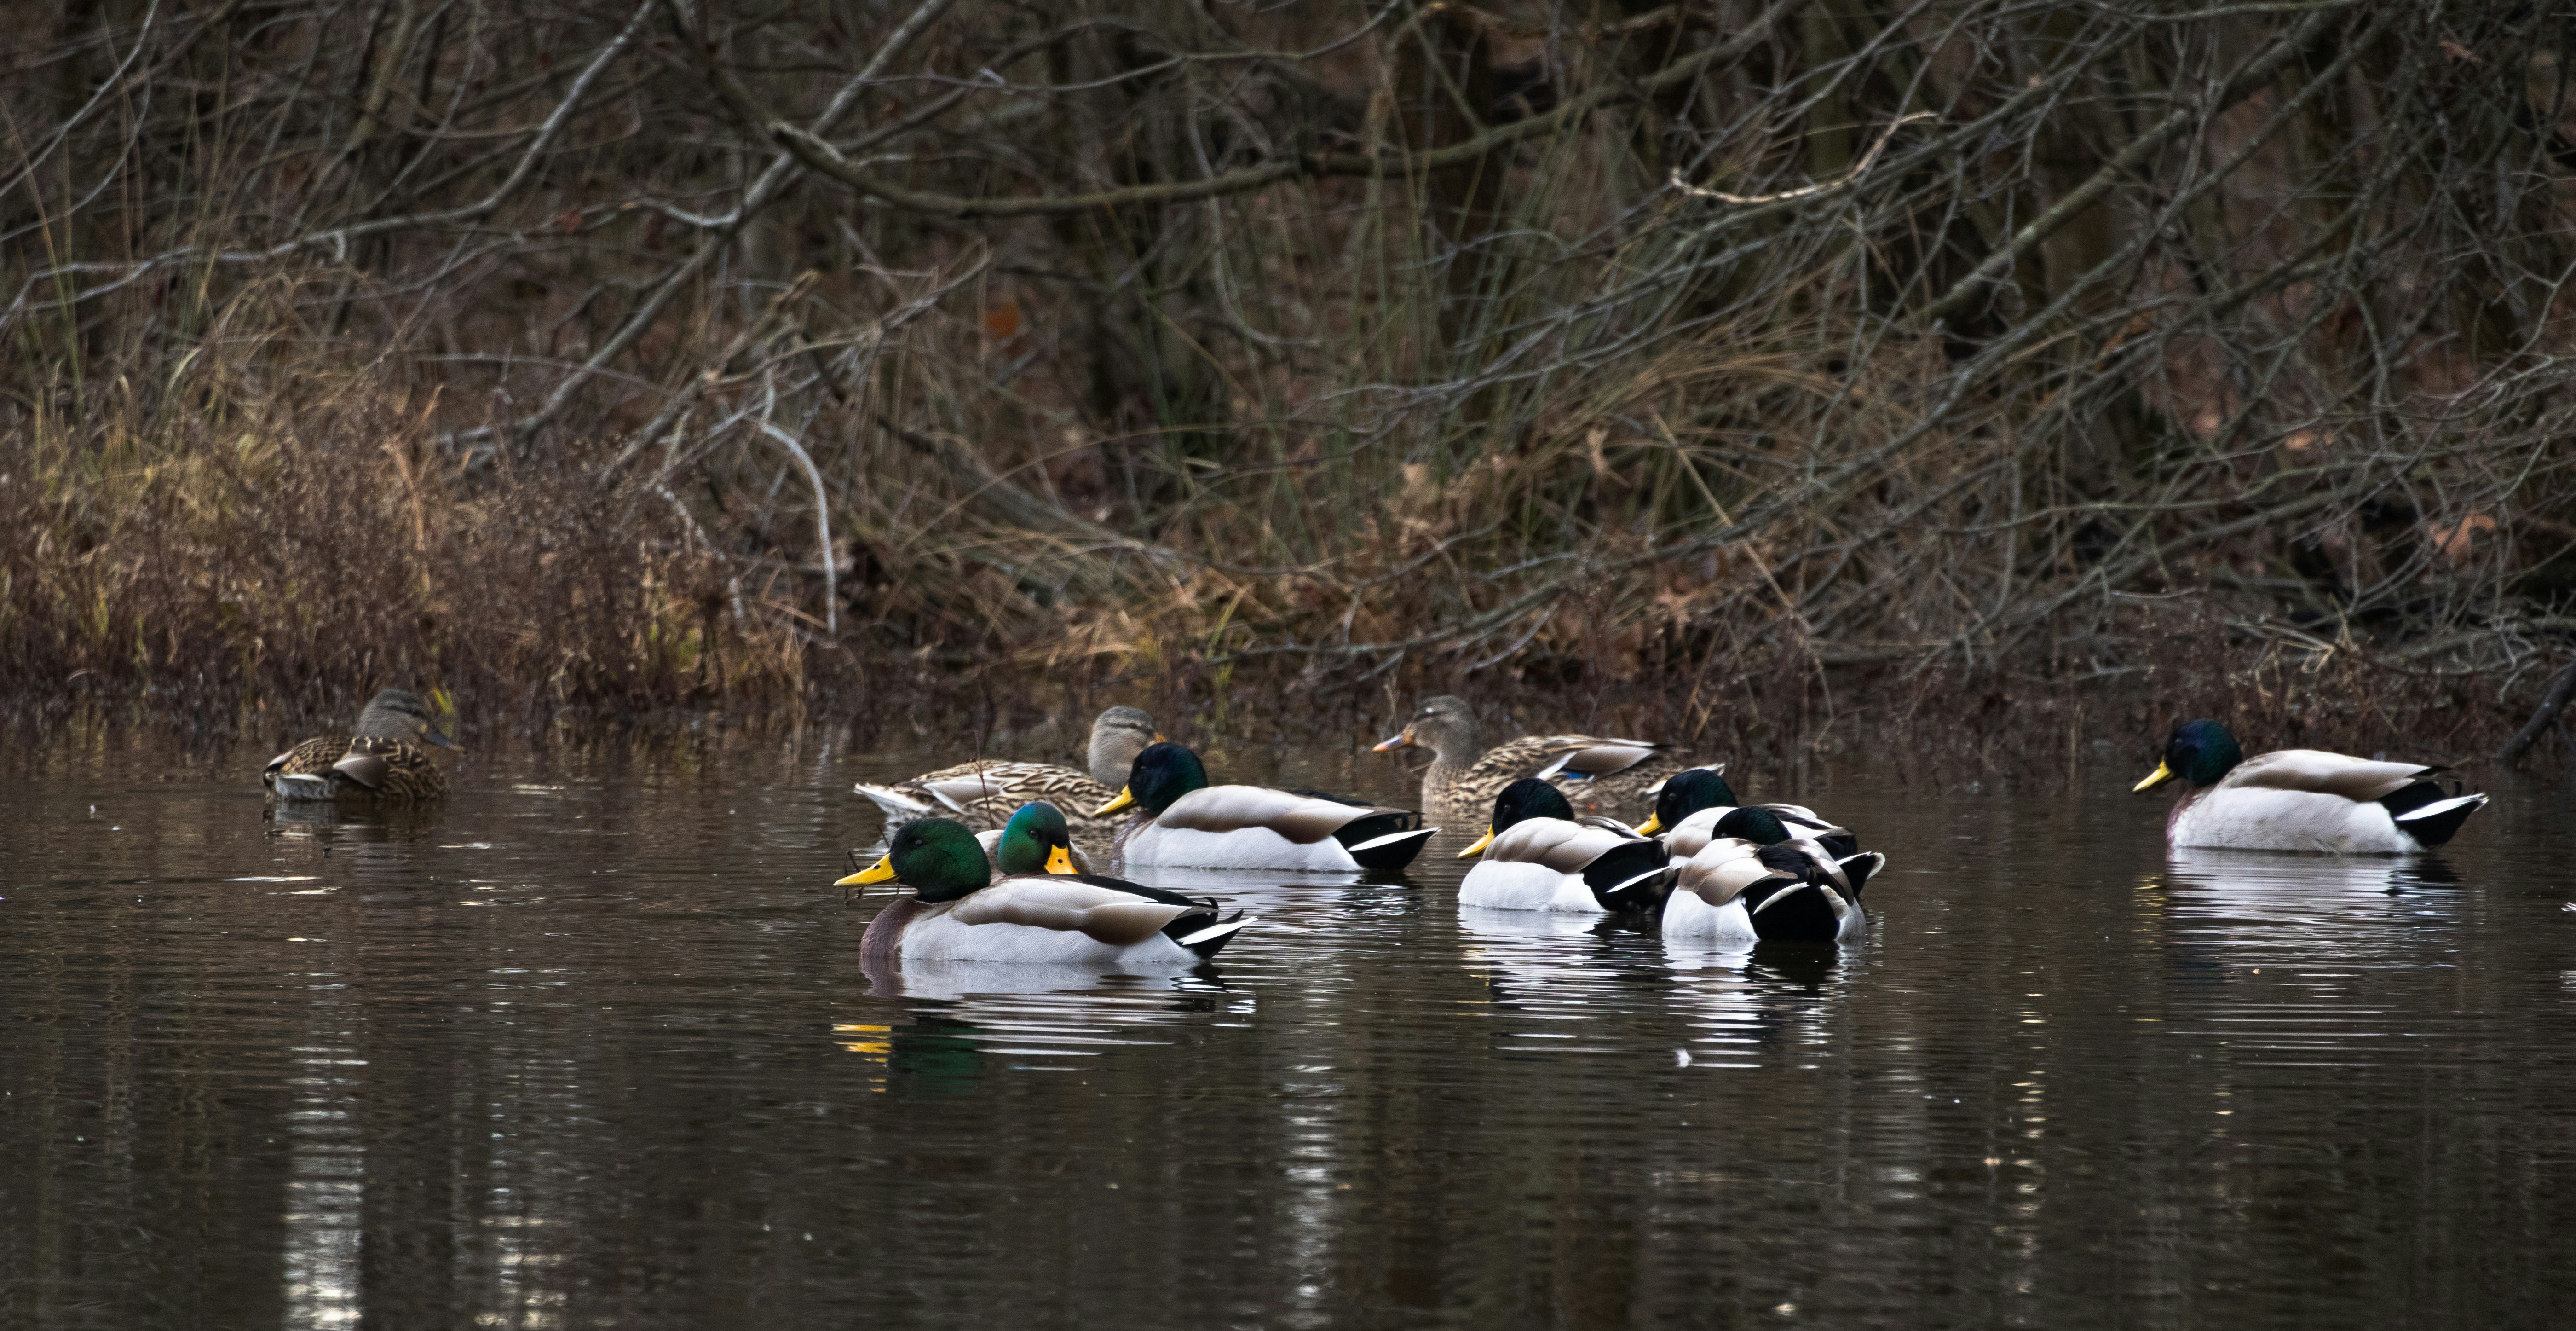 A group of mallard ducks sitting on the water, both female and males.